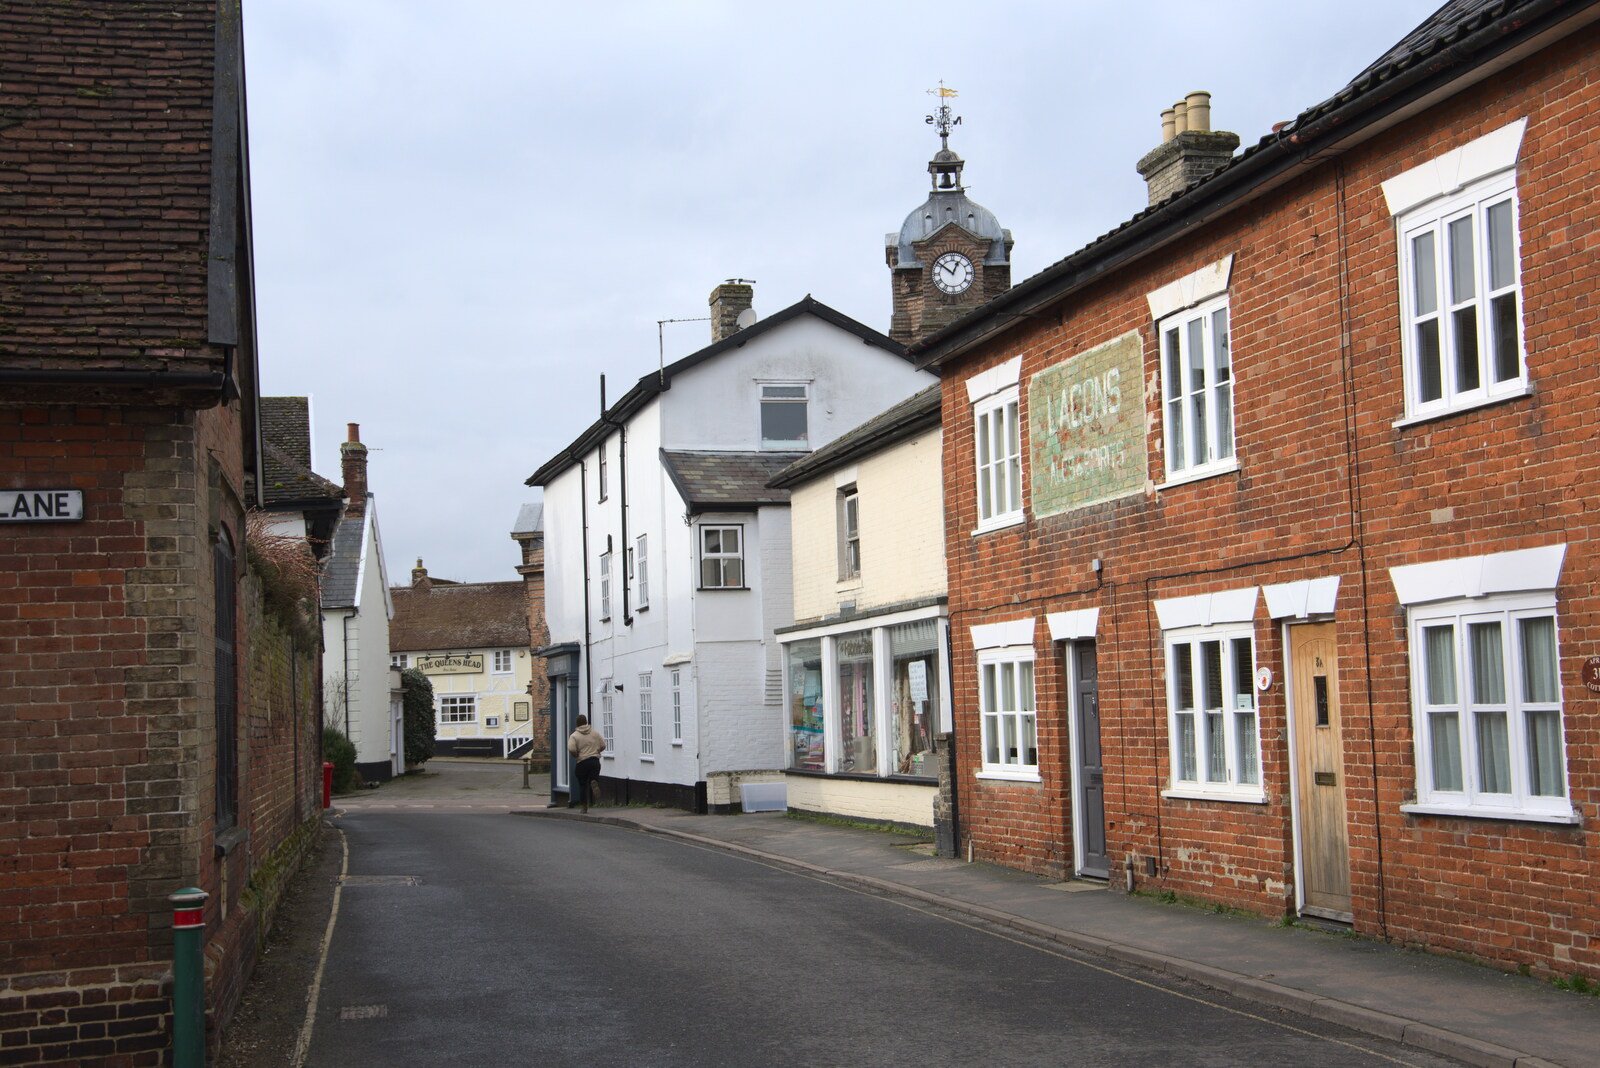 Church Street in Eye from The Old Sewage Works, The Avenue, Brome, Suffolk - 20th February 2021